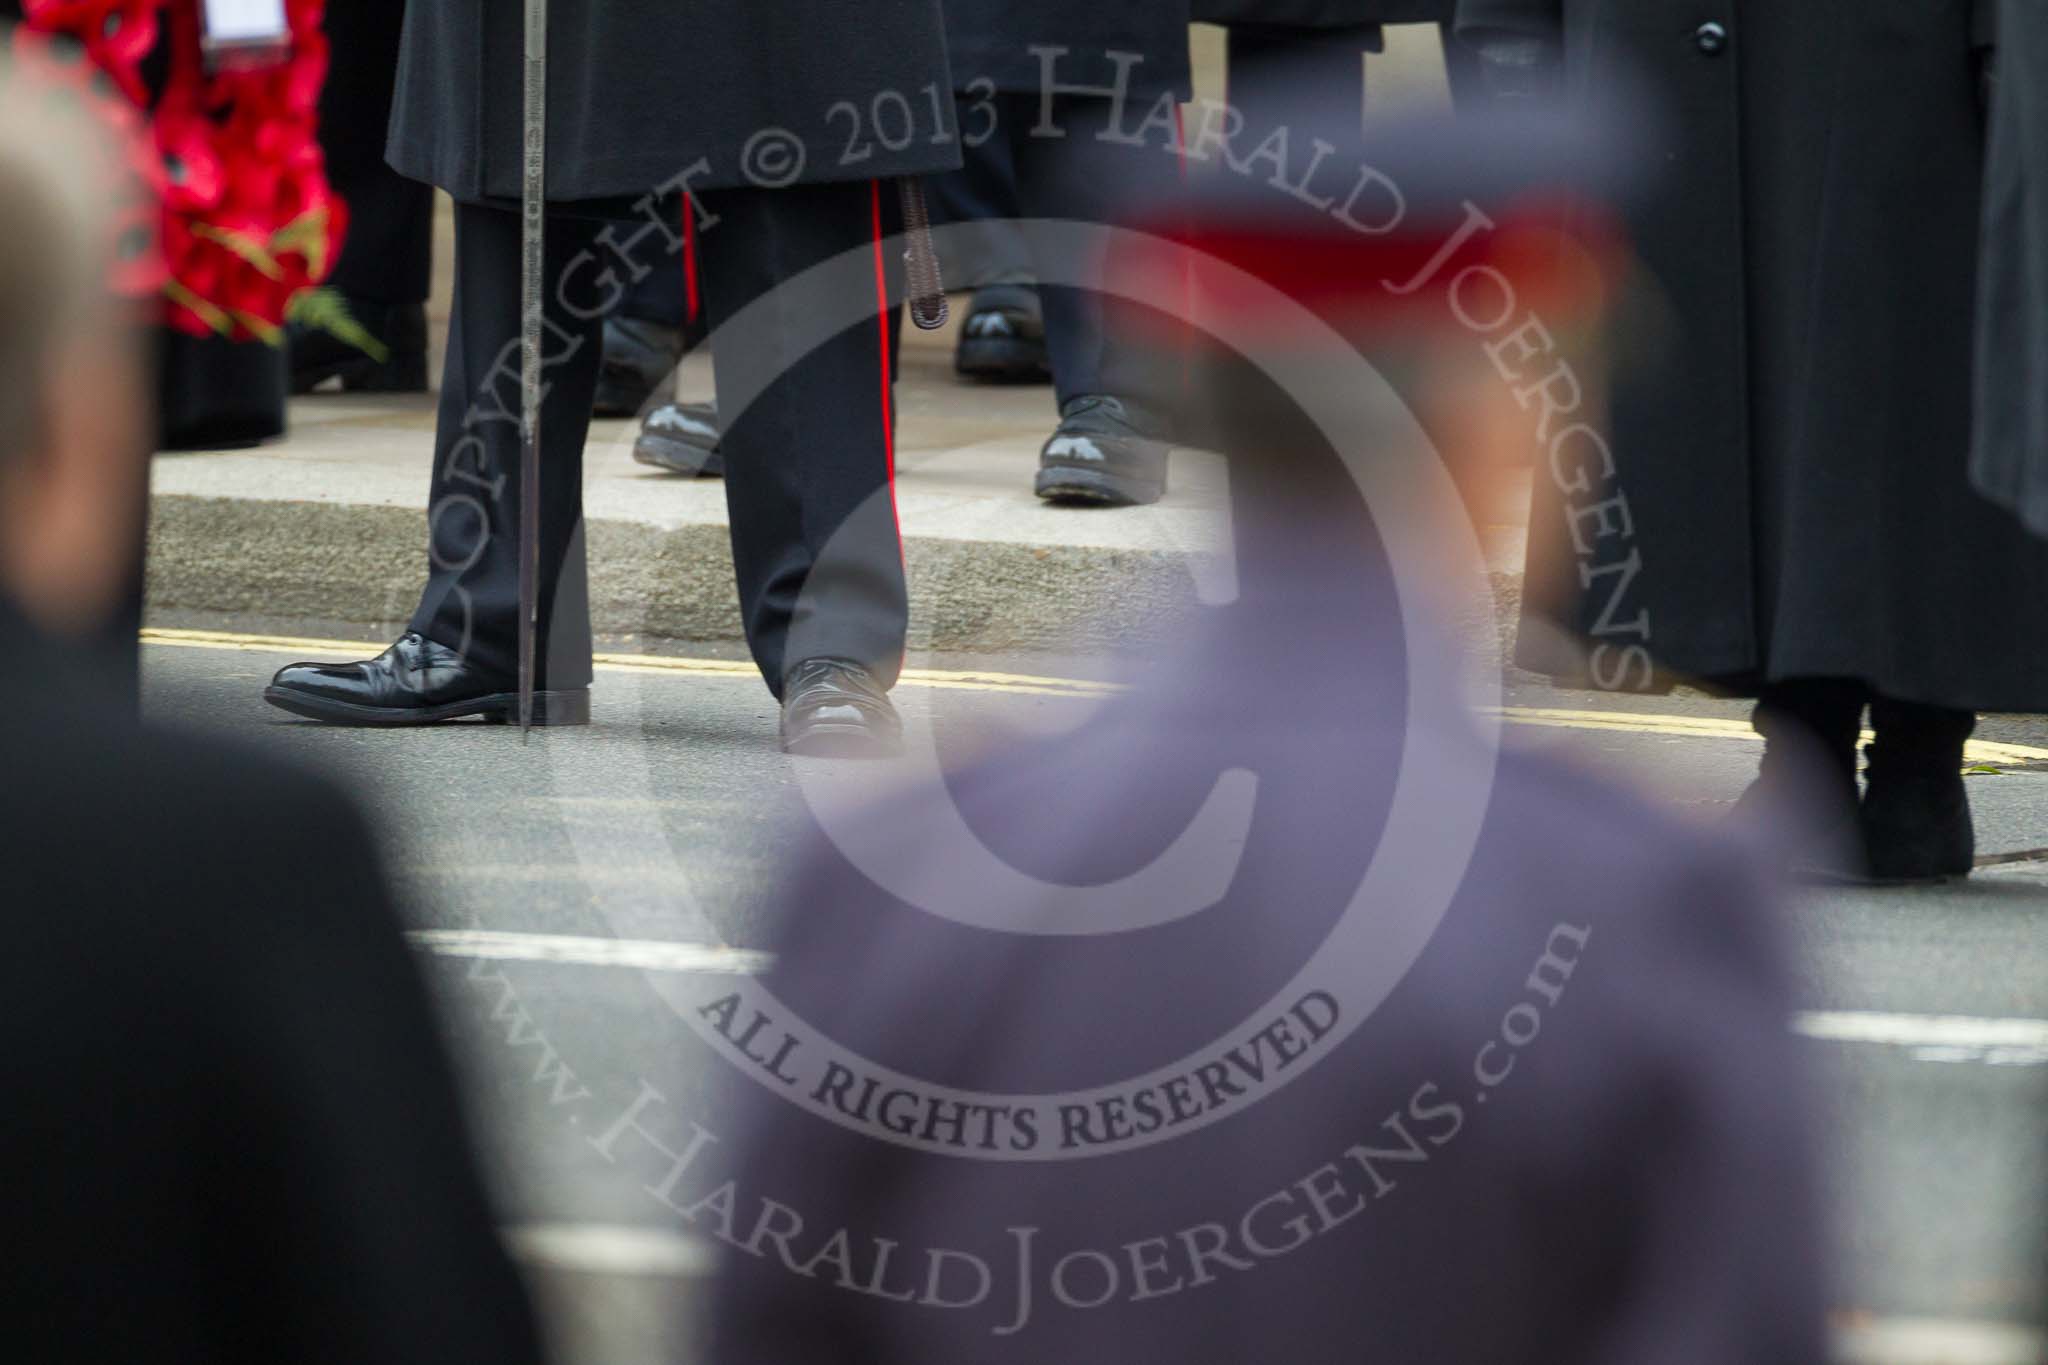 Remembrance Sunday at the Cenotaph 2015: The feet of a Royal Marine's officer seen between the head of the army and navy (both out of focus). Image #237, 08 November 2015 11:09 Whitehall, London, UK